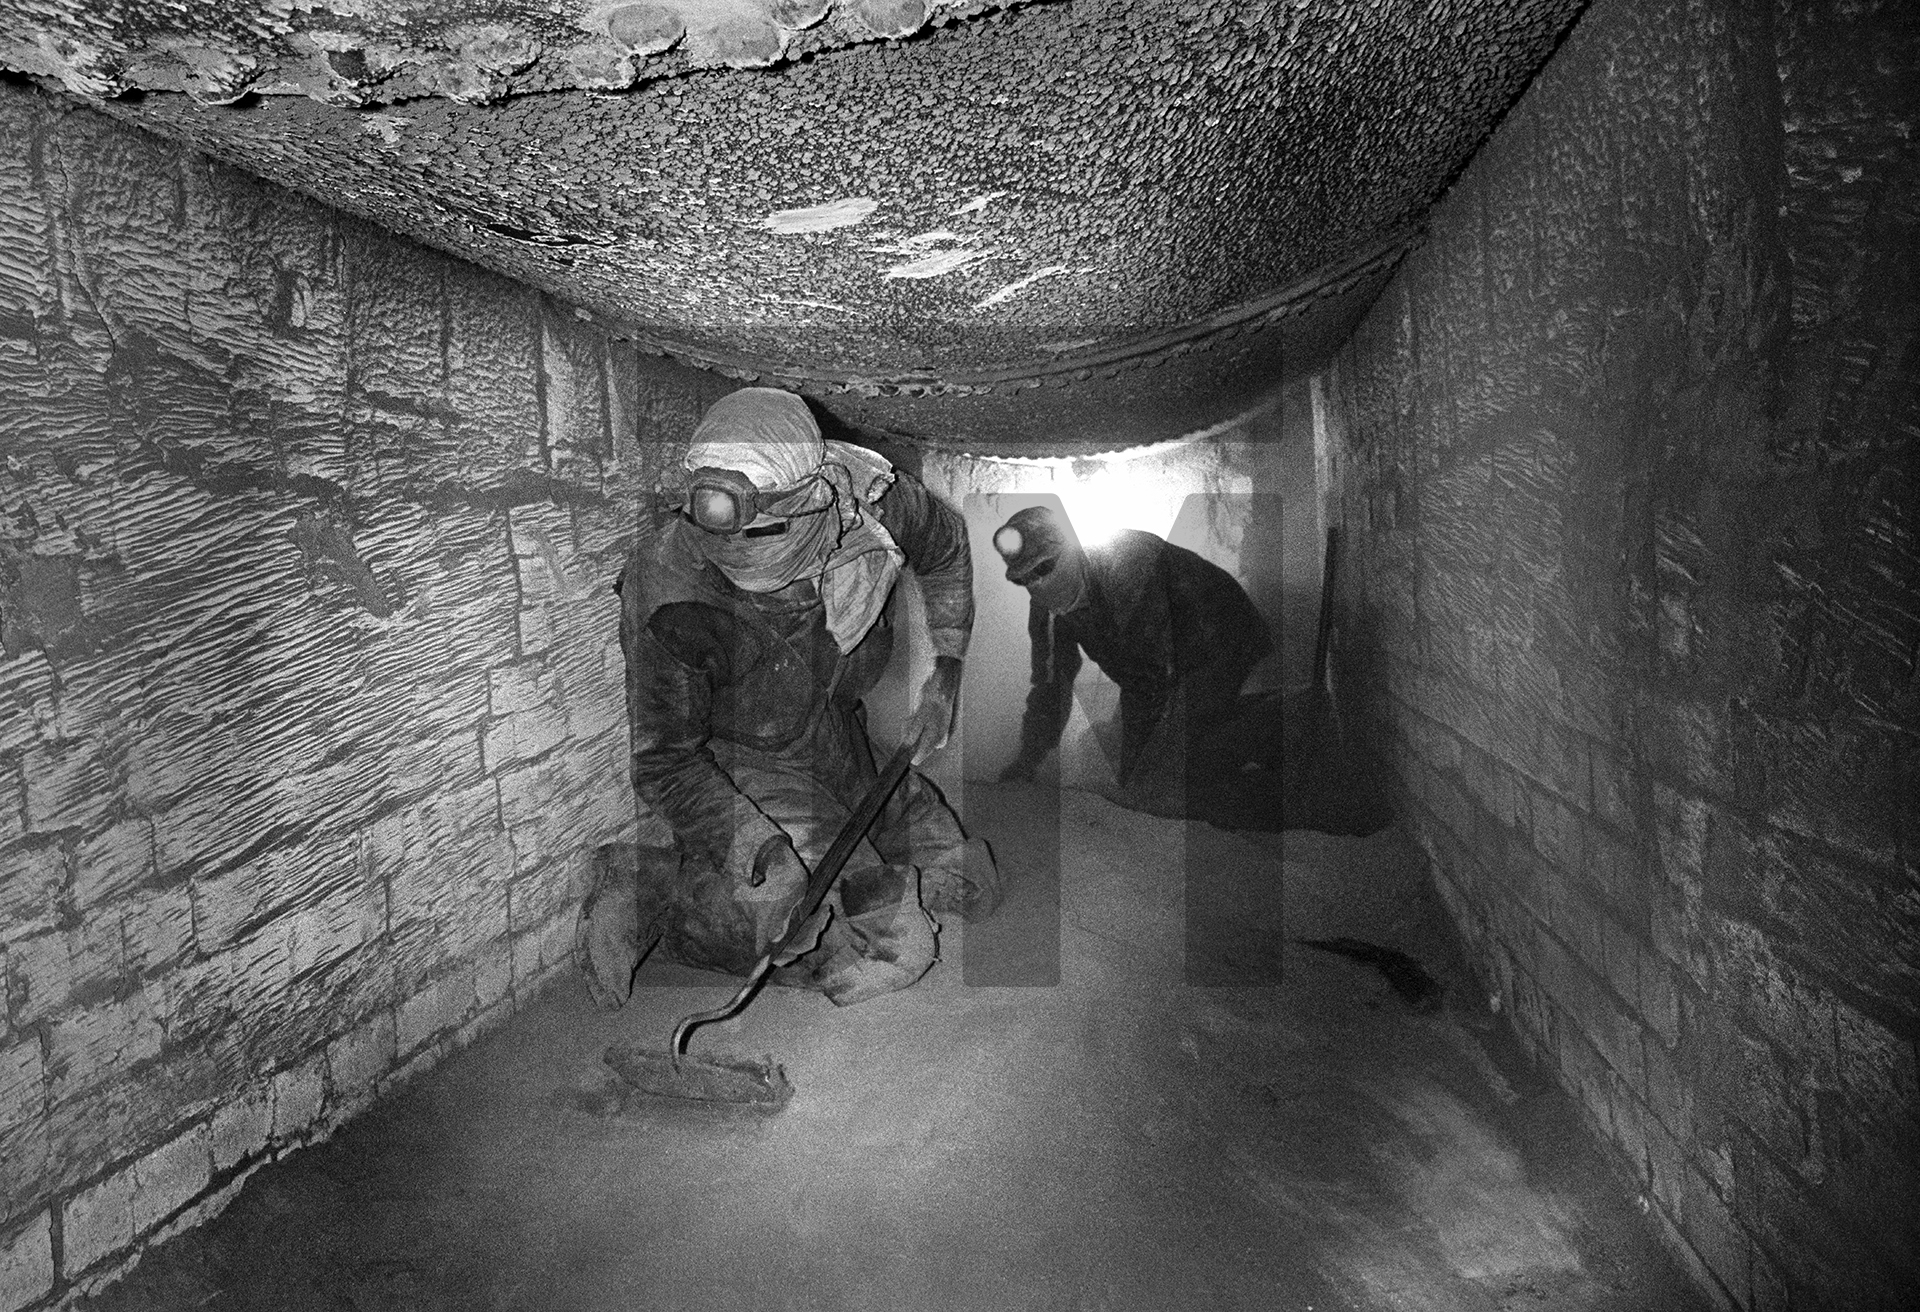 Working in the sole flue beneath the Lancashire boiler, raking fluedust. Easter holiday, April 1976 by Daniel Meadows